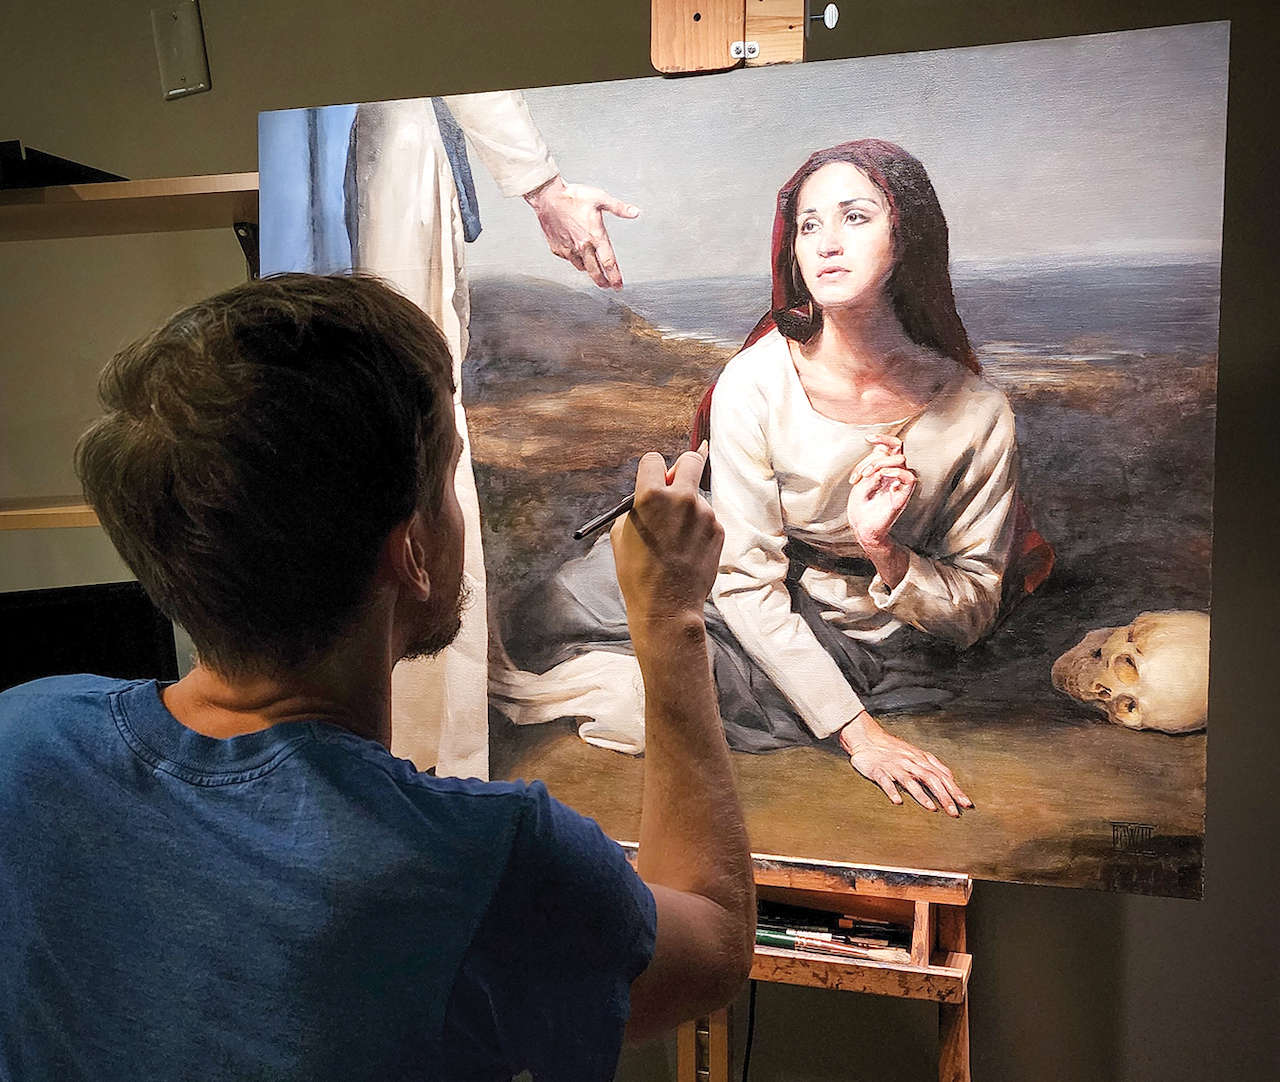 Artist: Painting of Mary Magdalen reminds us of our mortality and ...